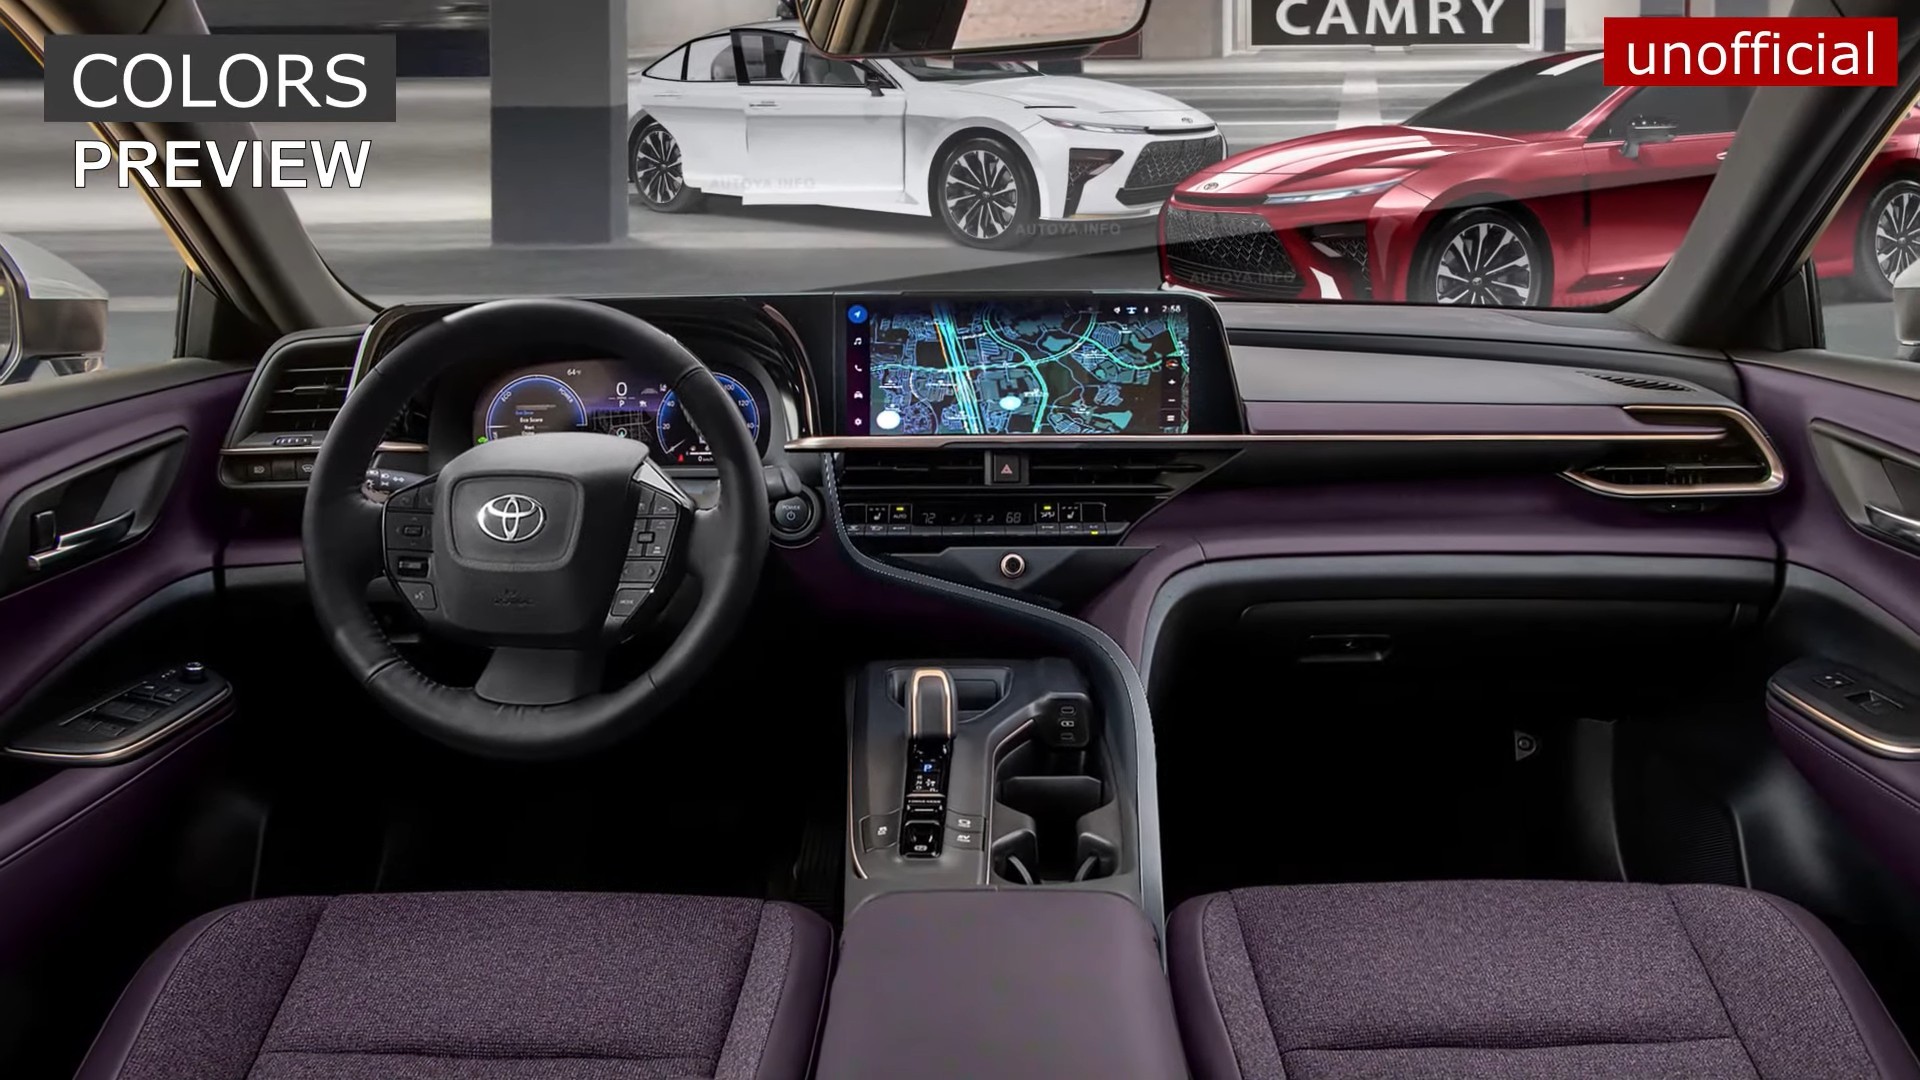 2024 Toyota Camry Ix Unofficially Presents The Colorful And Tech Savvy Interior 14 